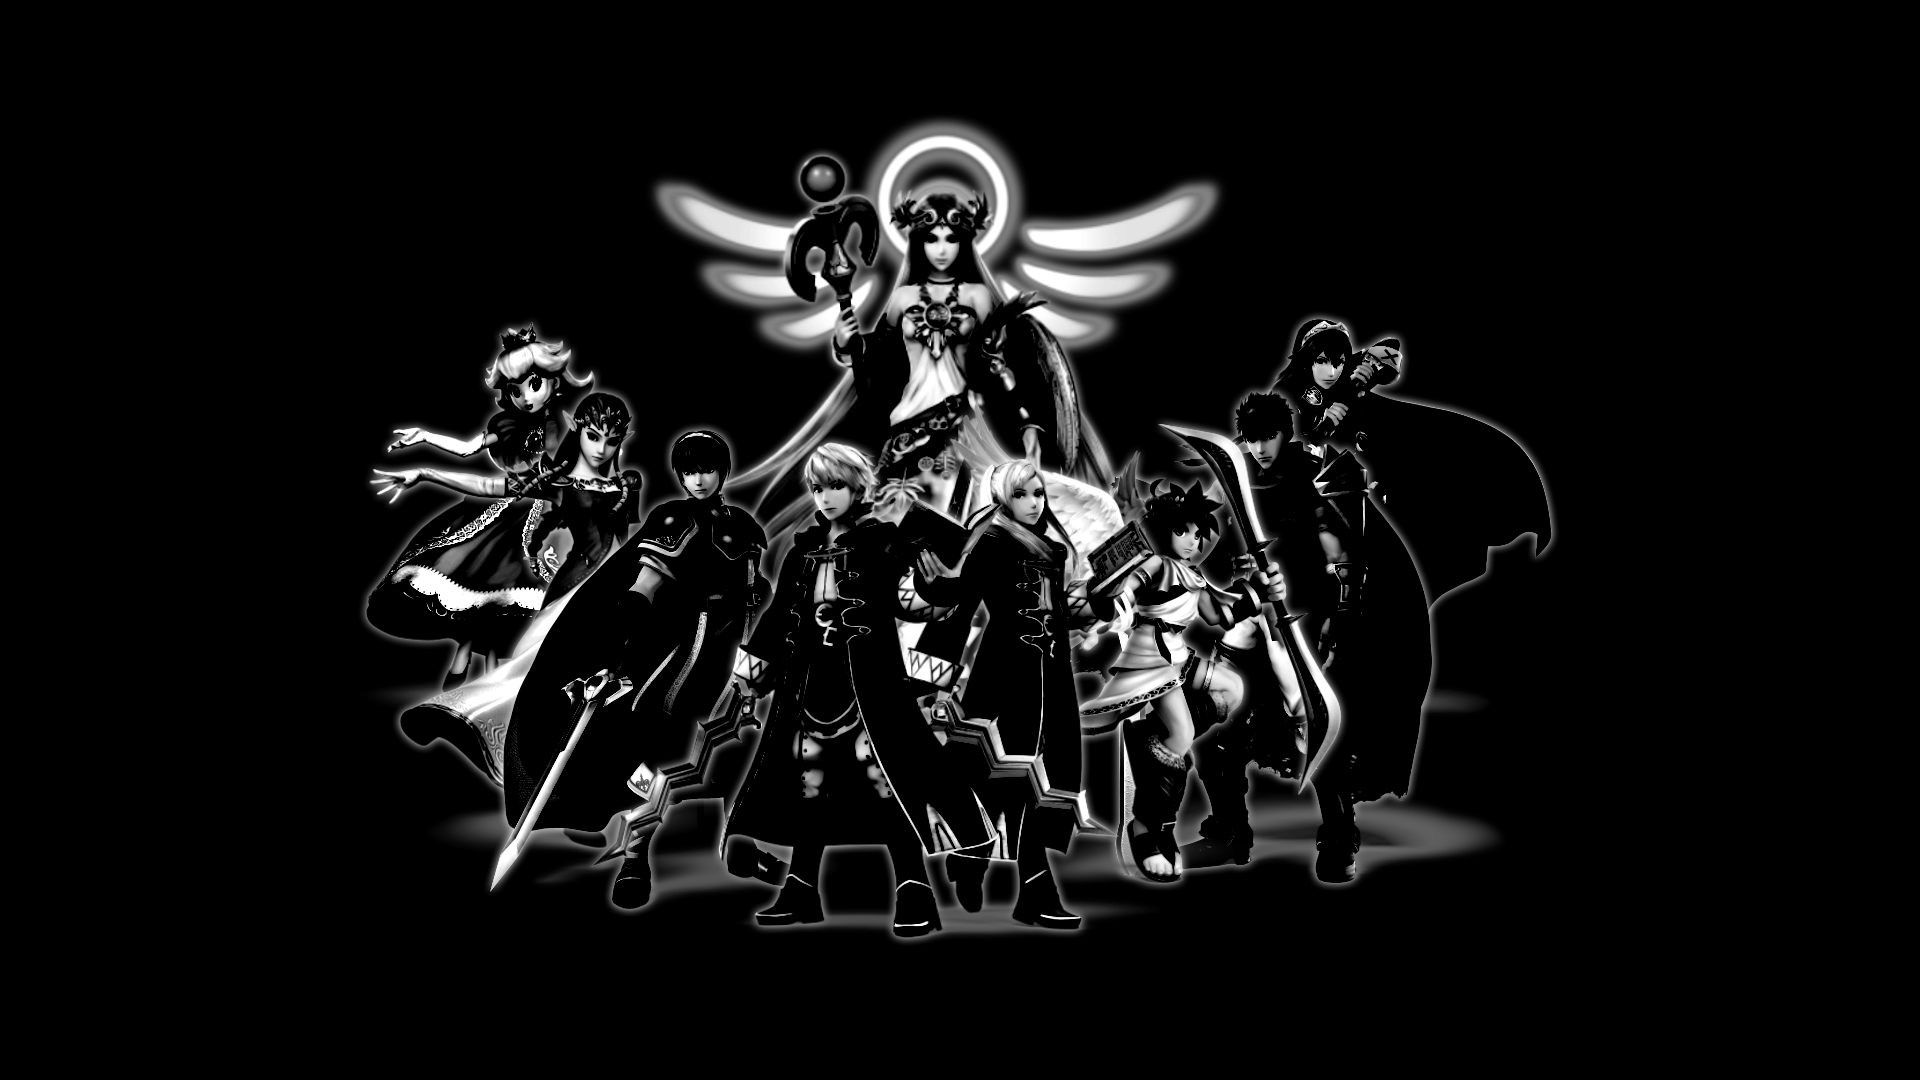 Super Smash Bros Background Bw By Cookedemil On